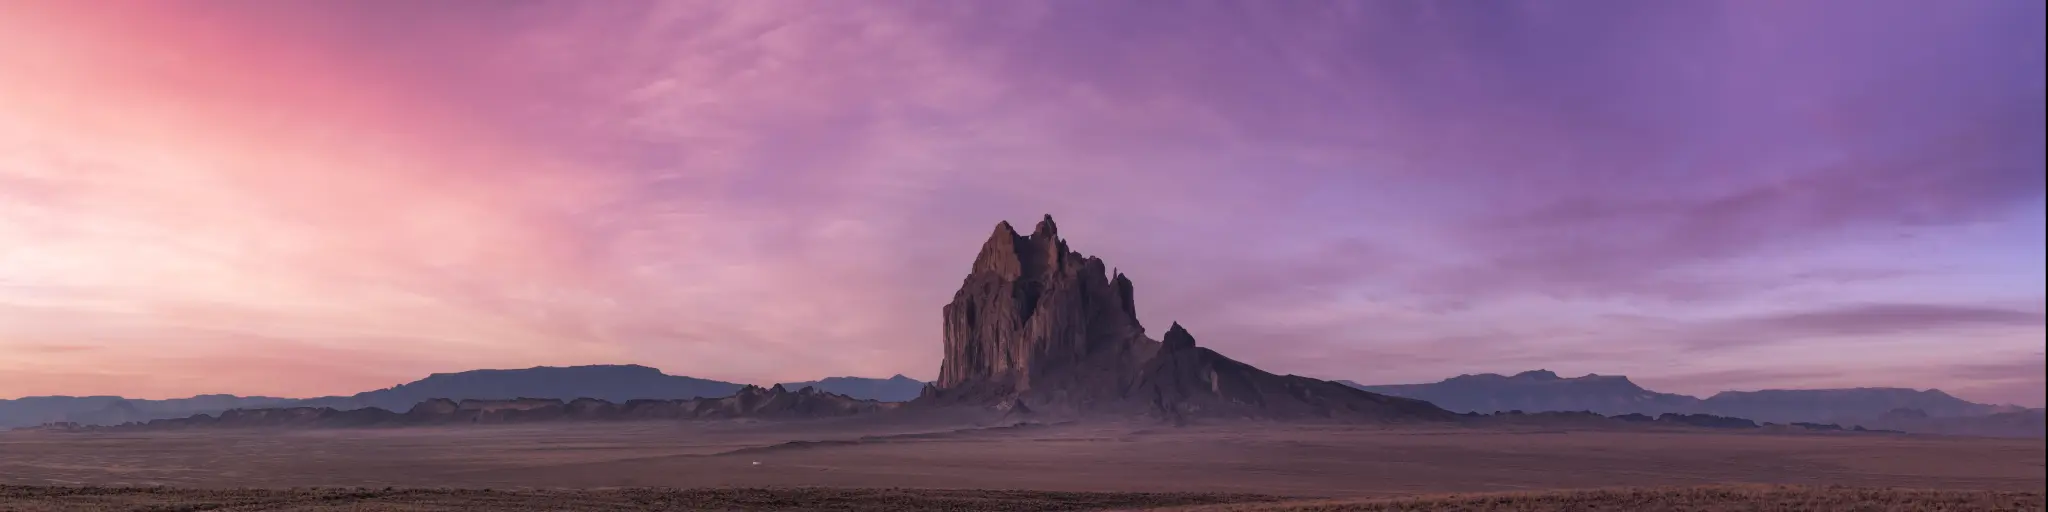 Wide, flat desert with large rock rising up, in pink light